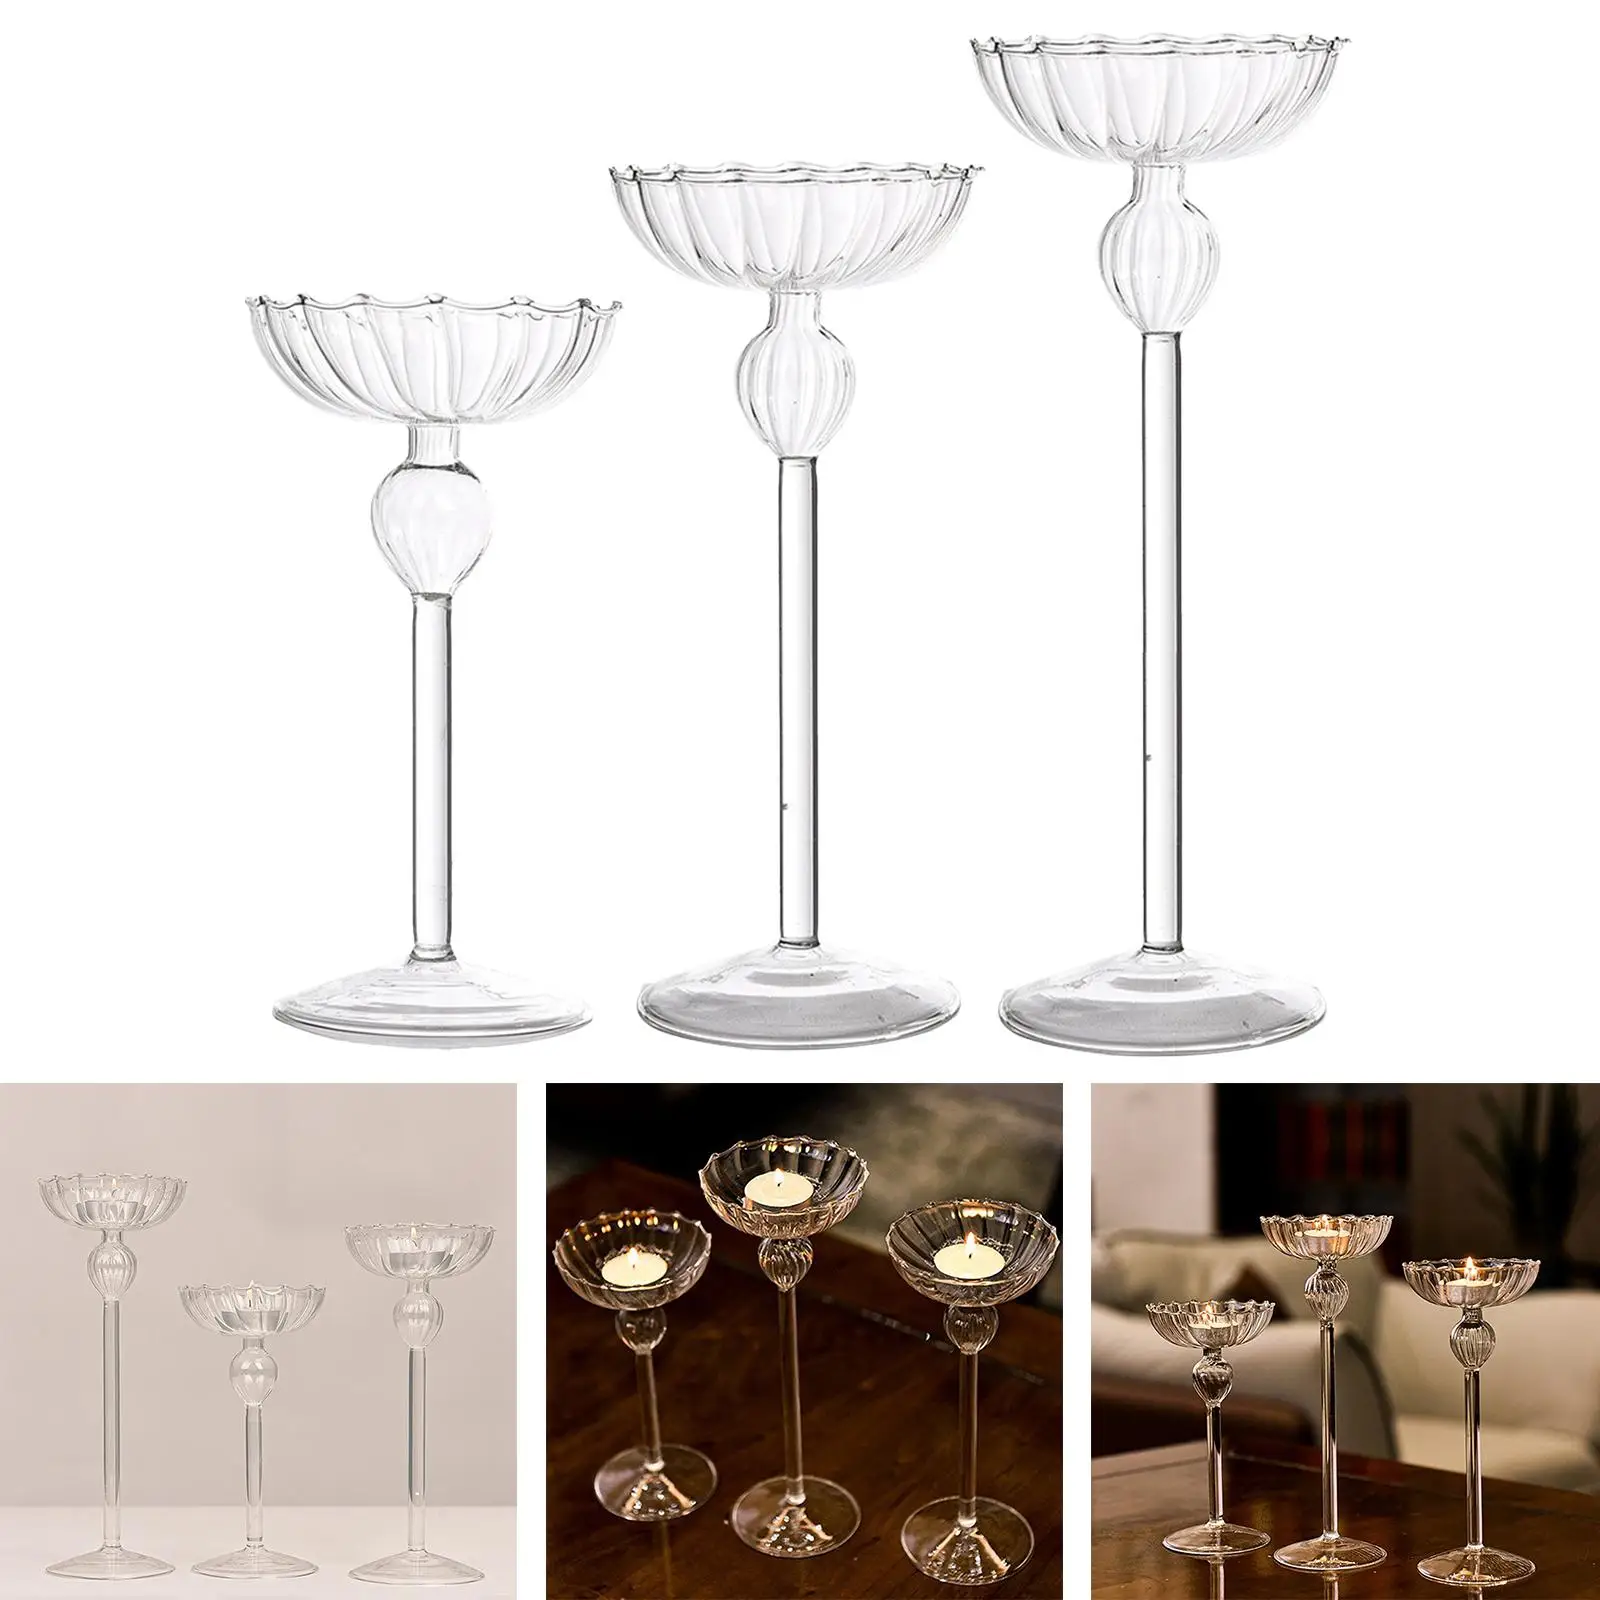 European Style Candle Holder Glass Candlestick Stand Candle Stand Tealight Candle Holders for Wedding Table Centerpiece Decor